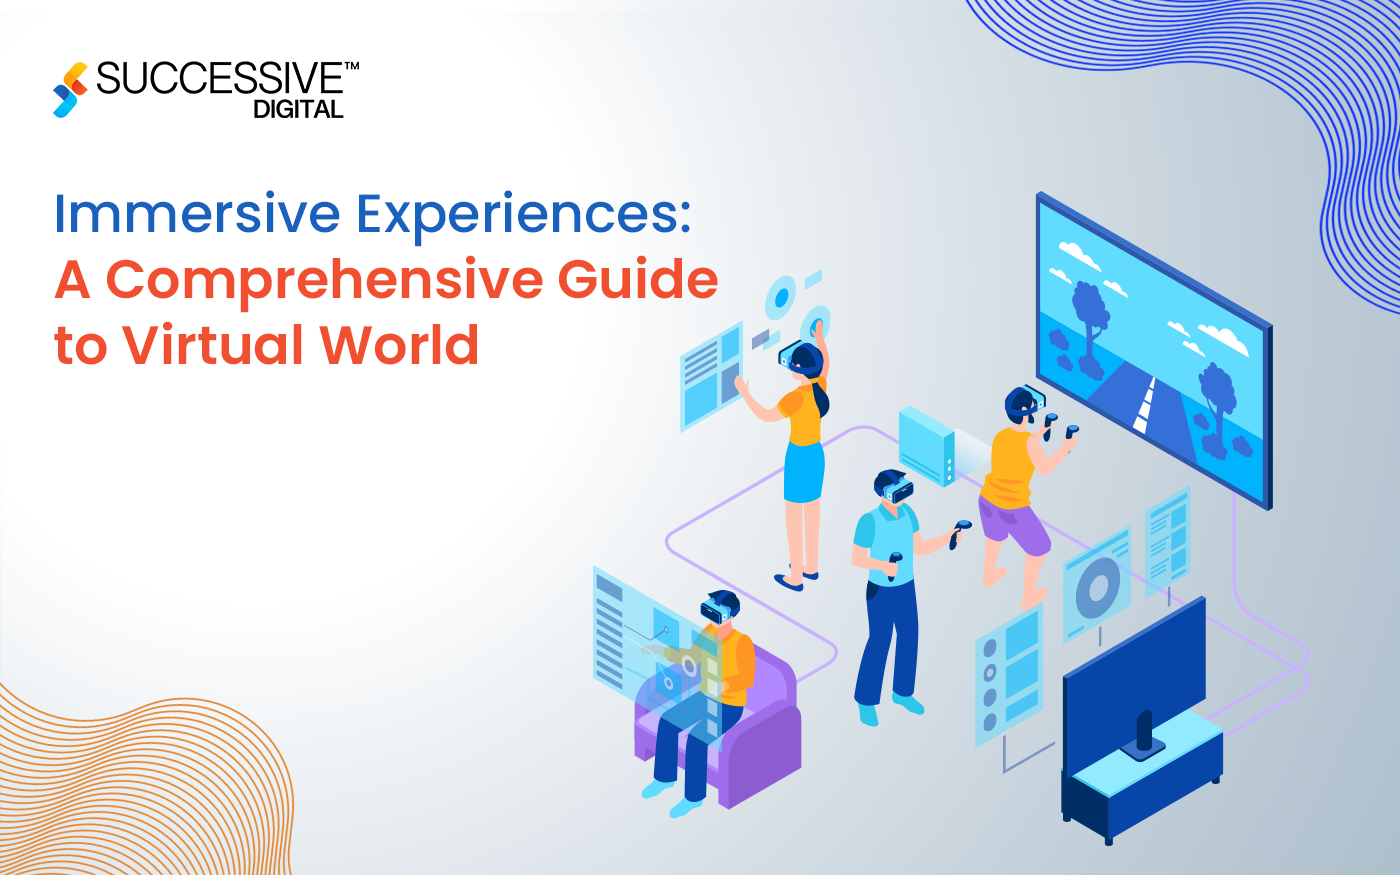 Immersive Experiences: A Comprehensive Guide to Virtual World